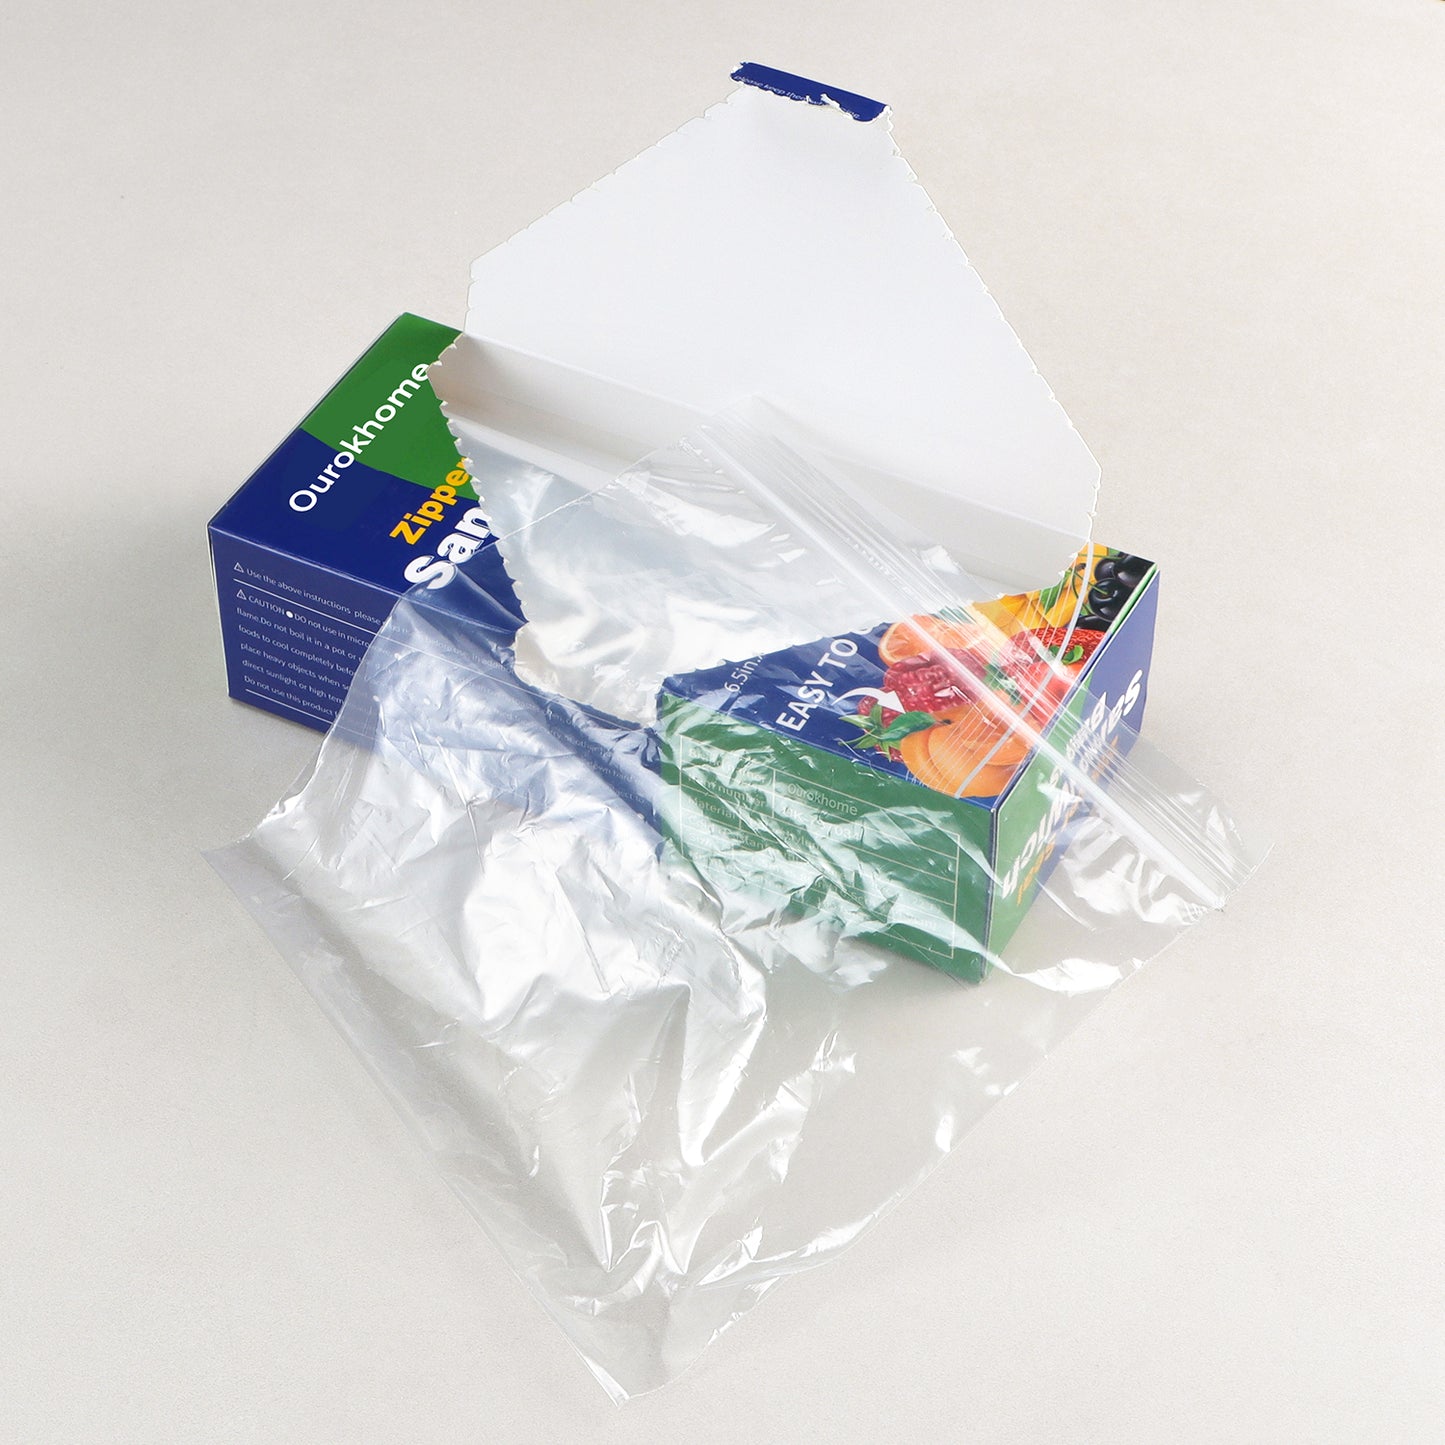 Ourokhome vacuum bags